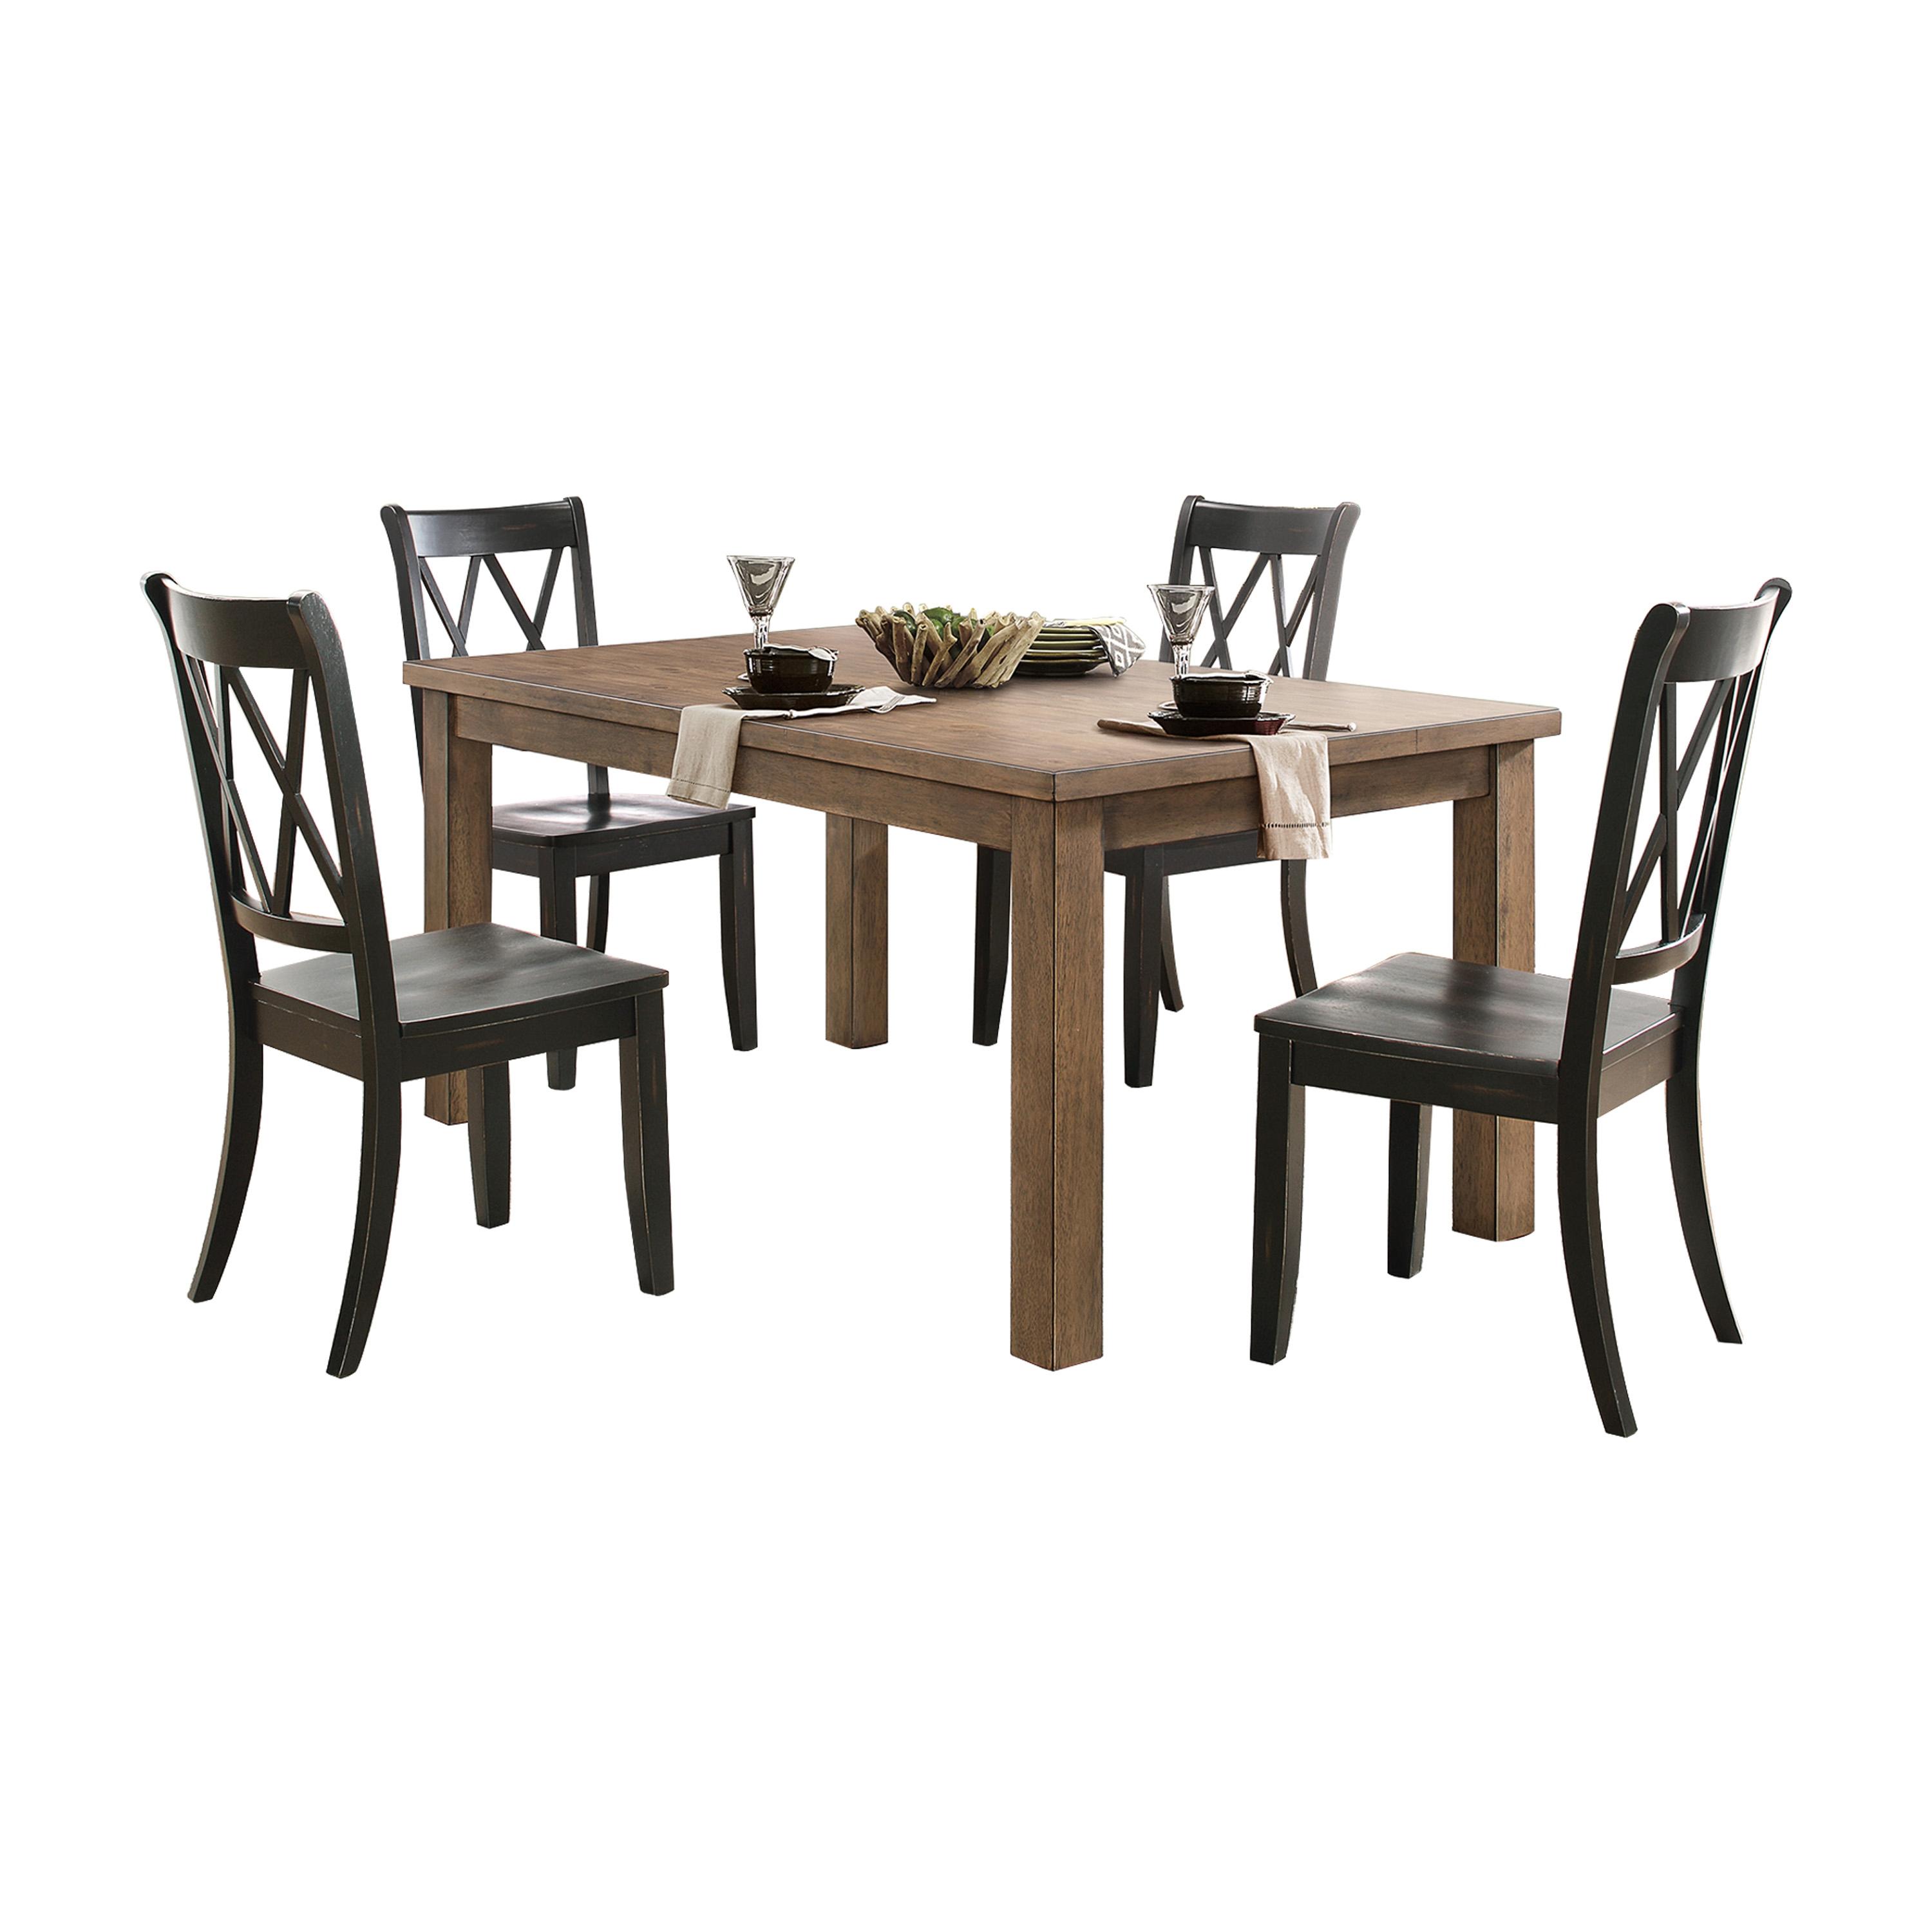 Transitional Dining Room Set 5516-66*5PC Janina 5516-66*5PC in Black 